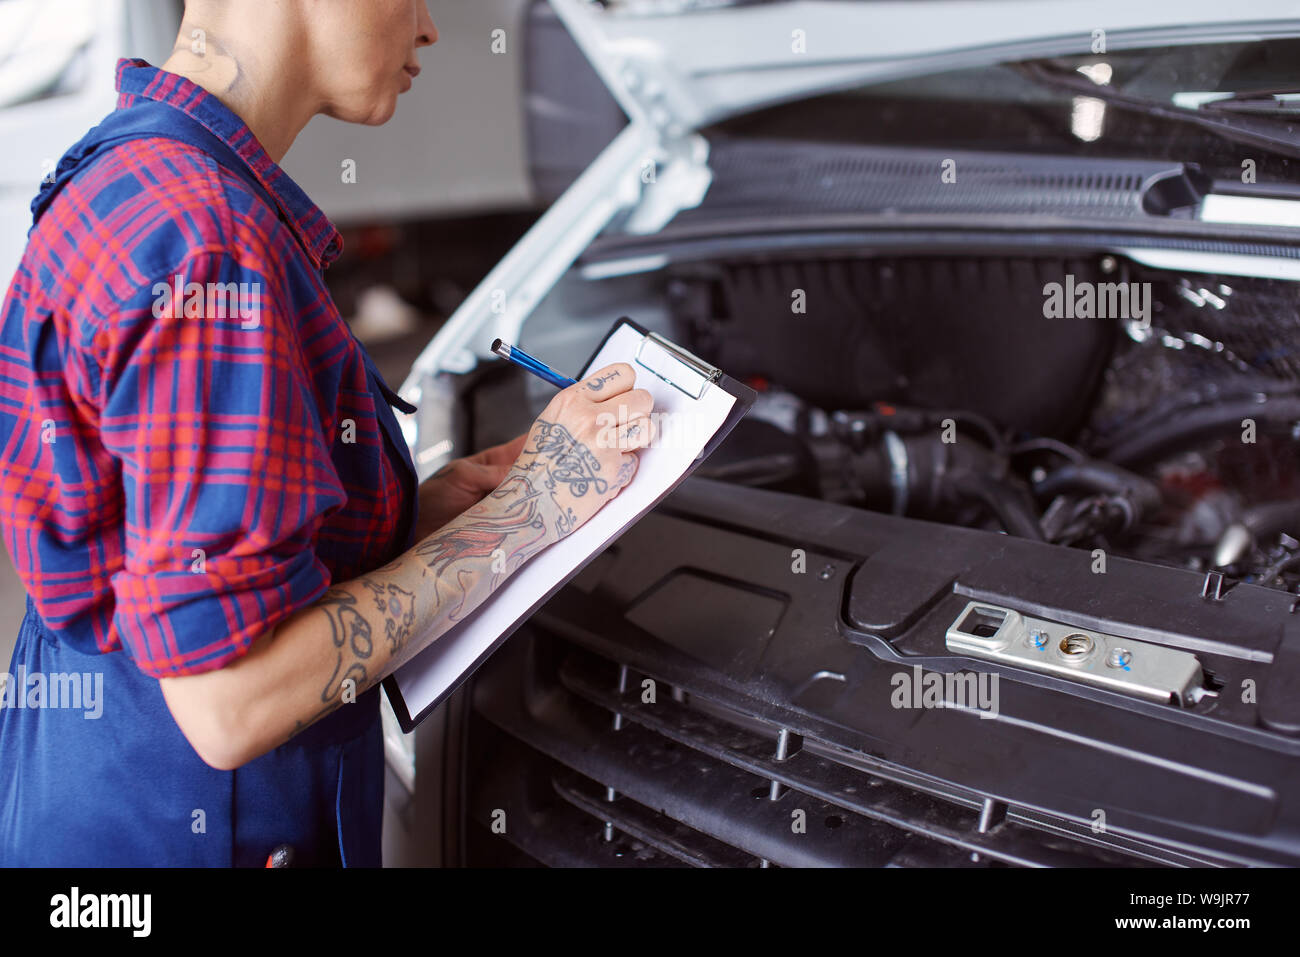 Automechanic with nice tattooes makes a list of problems needed to be checked before she finishes the repair. Stock Photo